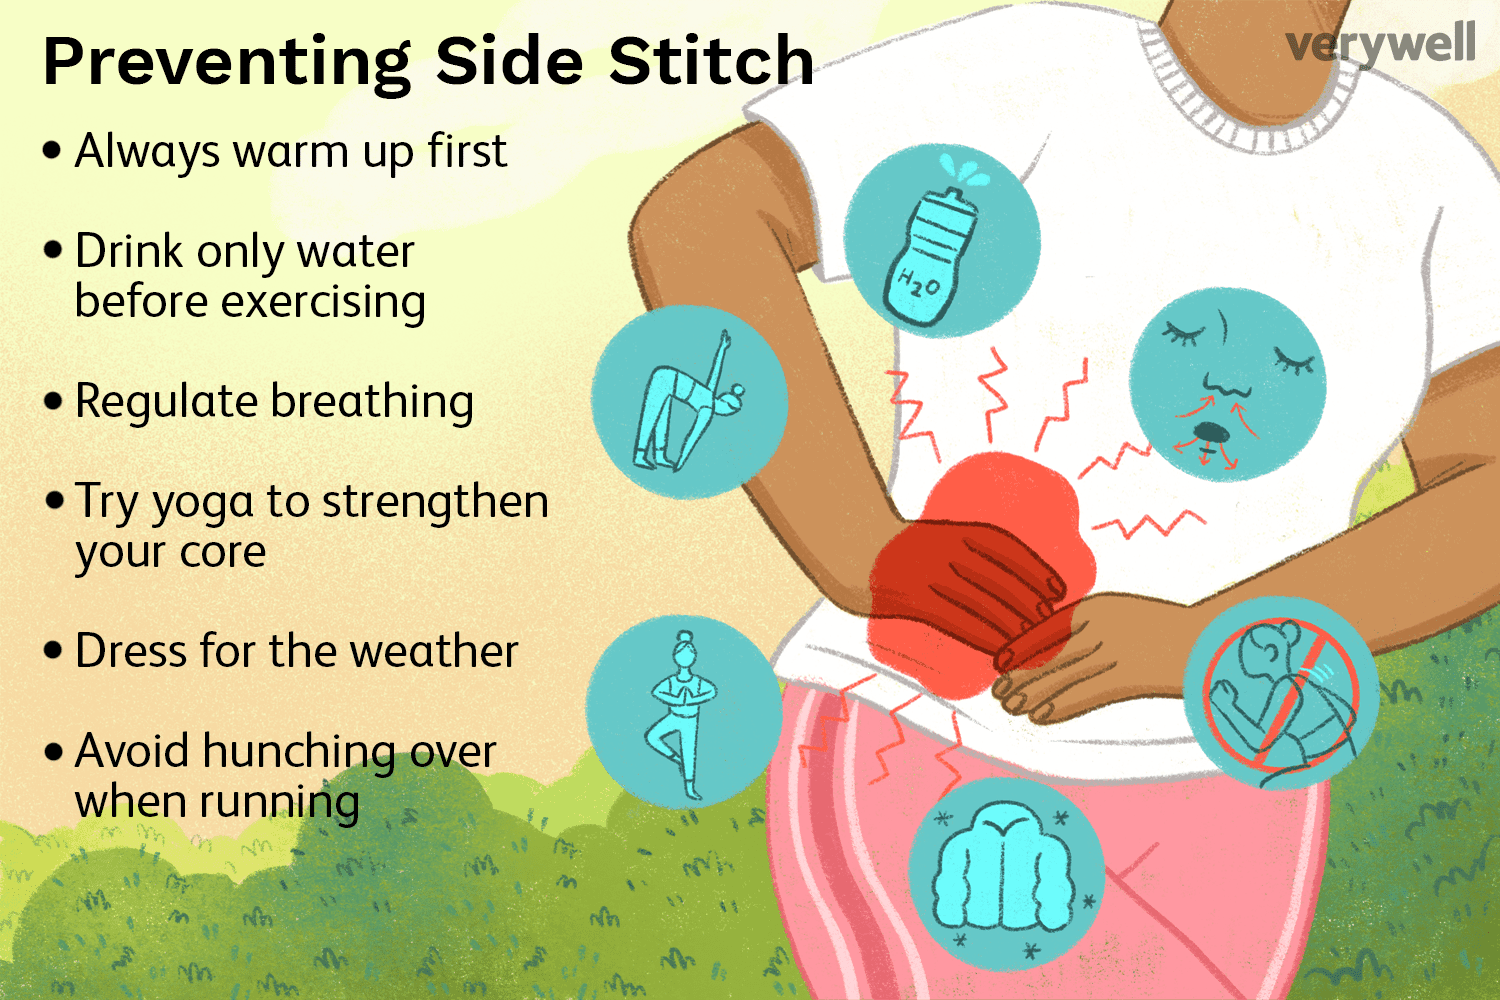 How to prevent a side stich